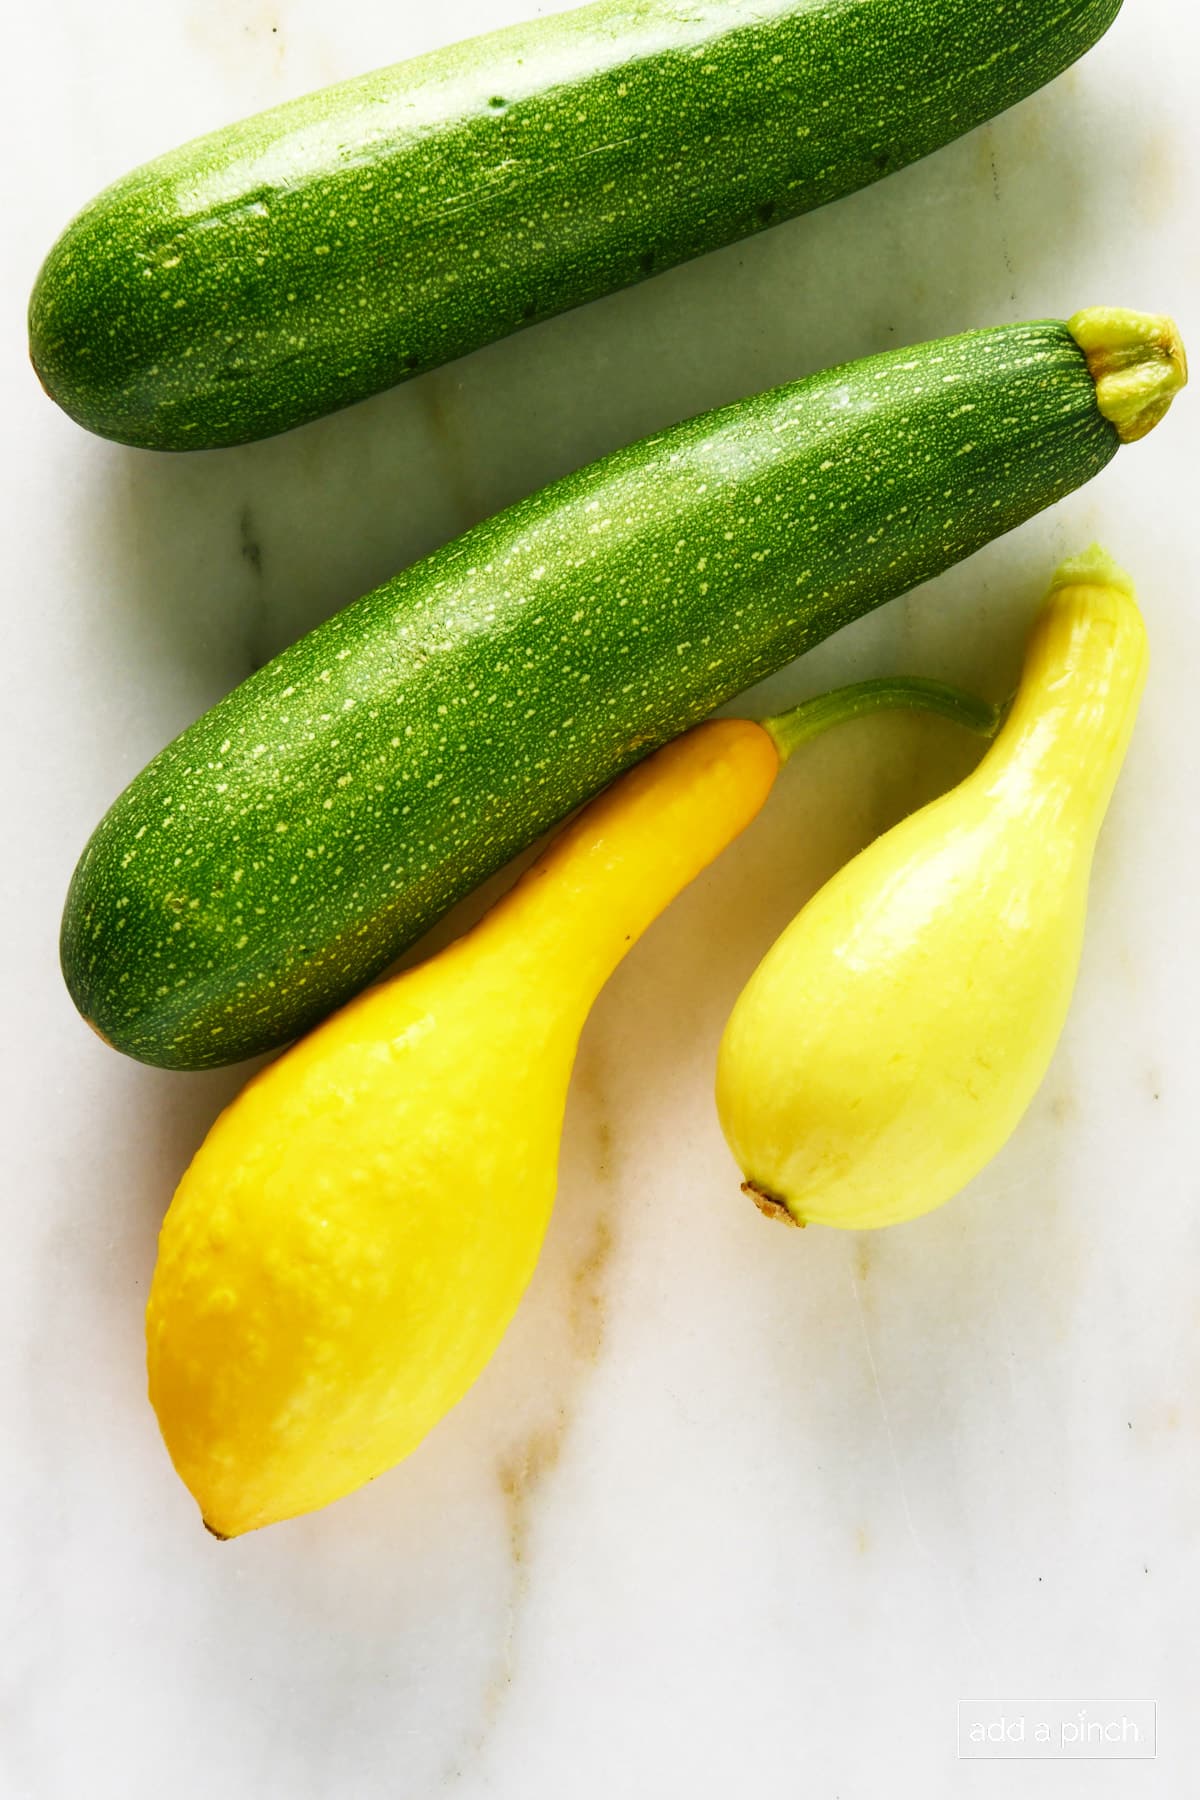 Photo of zucchini and yellow squash on a marble surface.